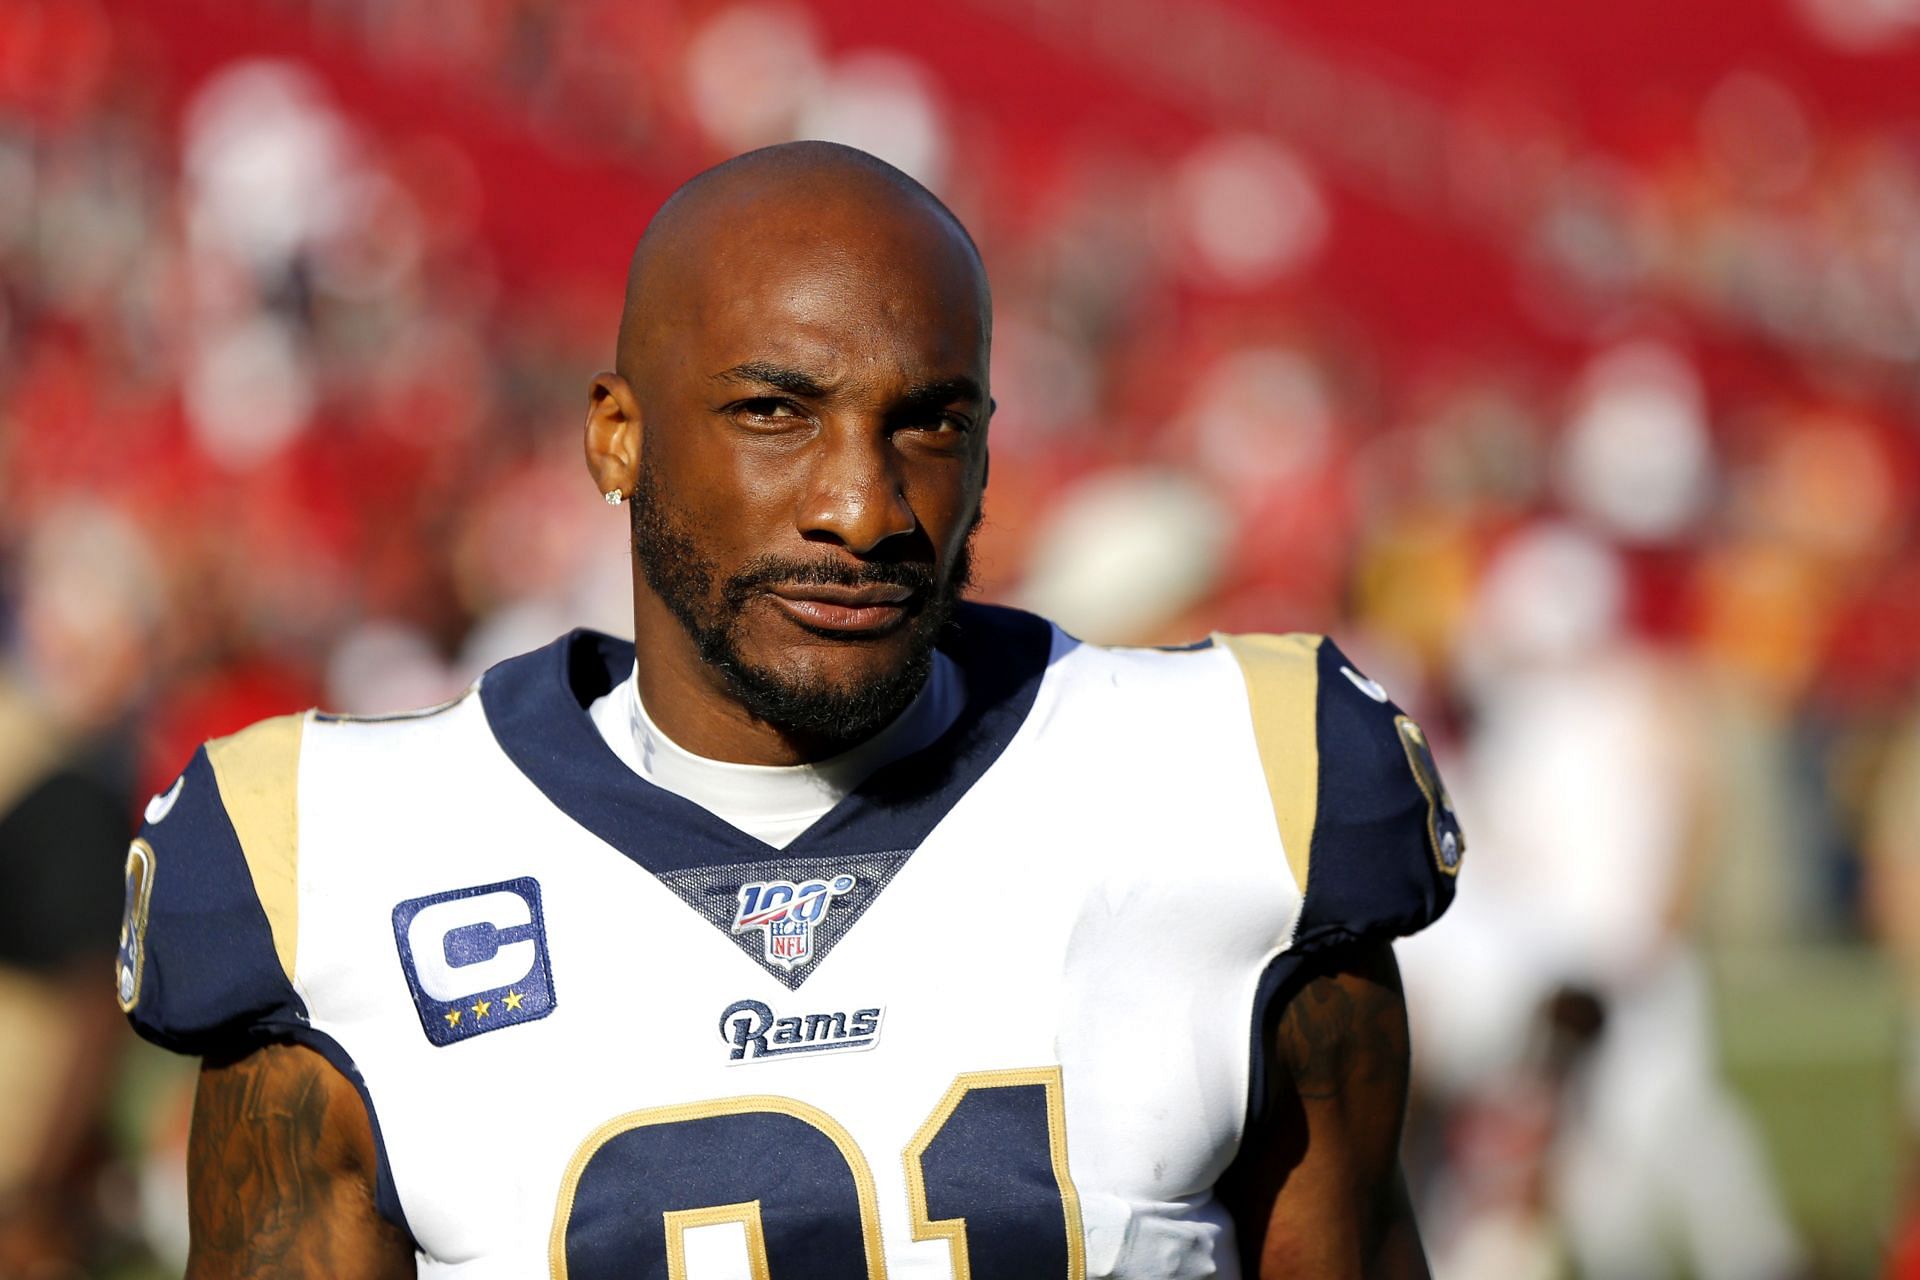 The formere NFL cornerback has been in the news for the wrong reasons